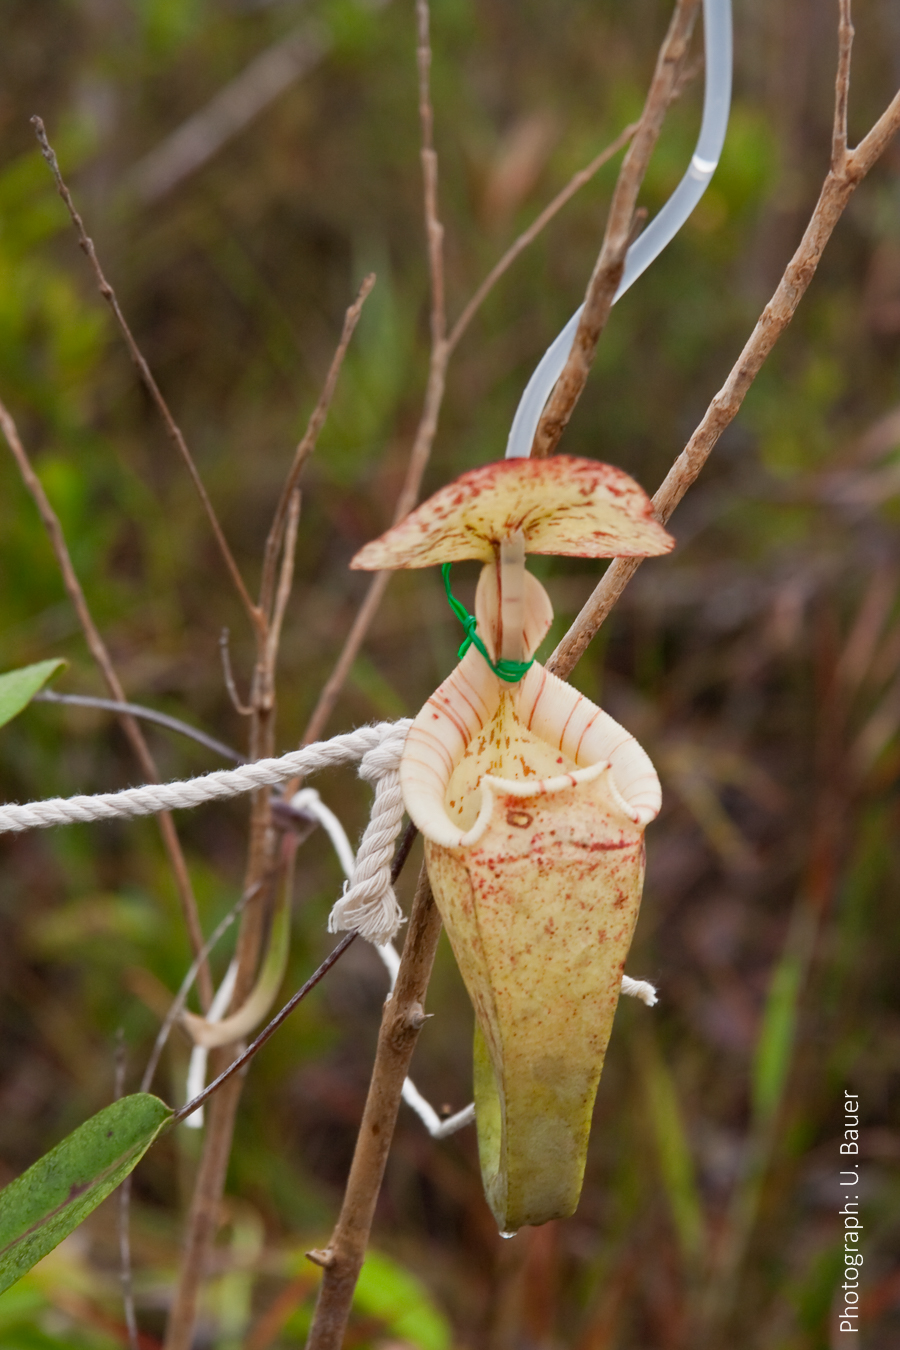 Carnivorous Pitcher Plant Catches Ants by Changing Slipperiness of Peristome – Ulrike Bauer (2015)